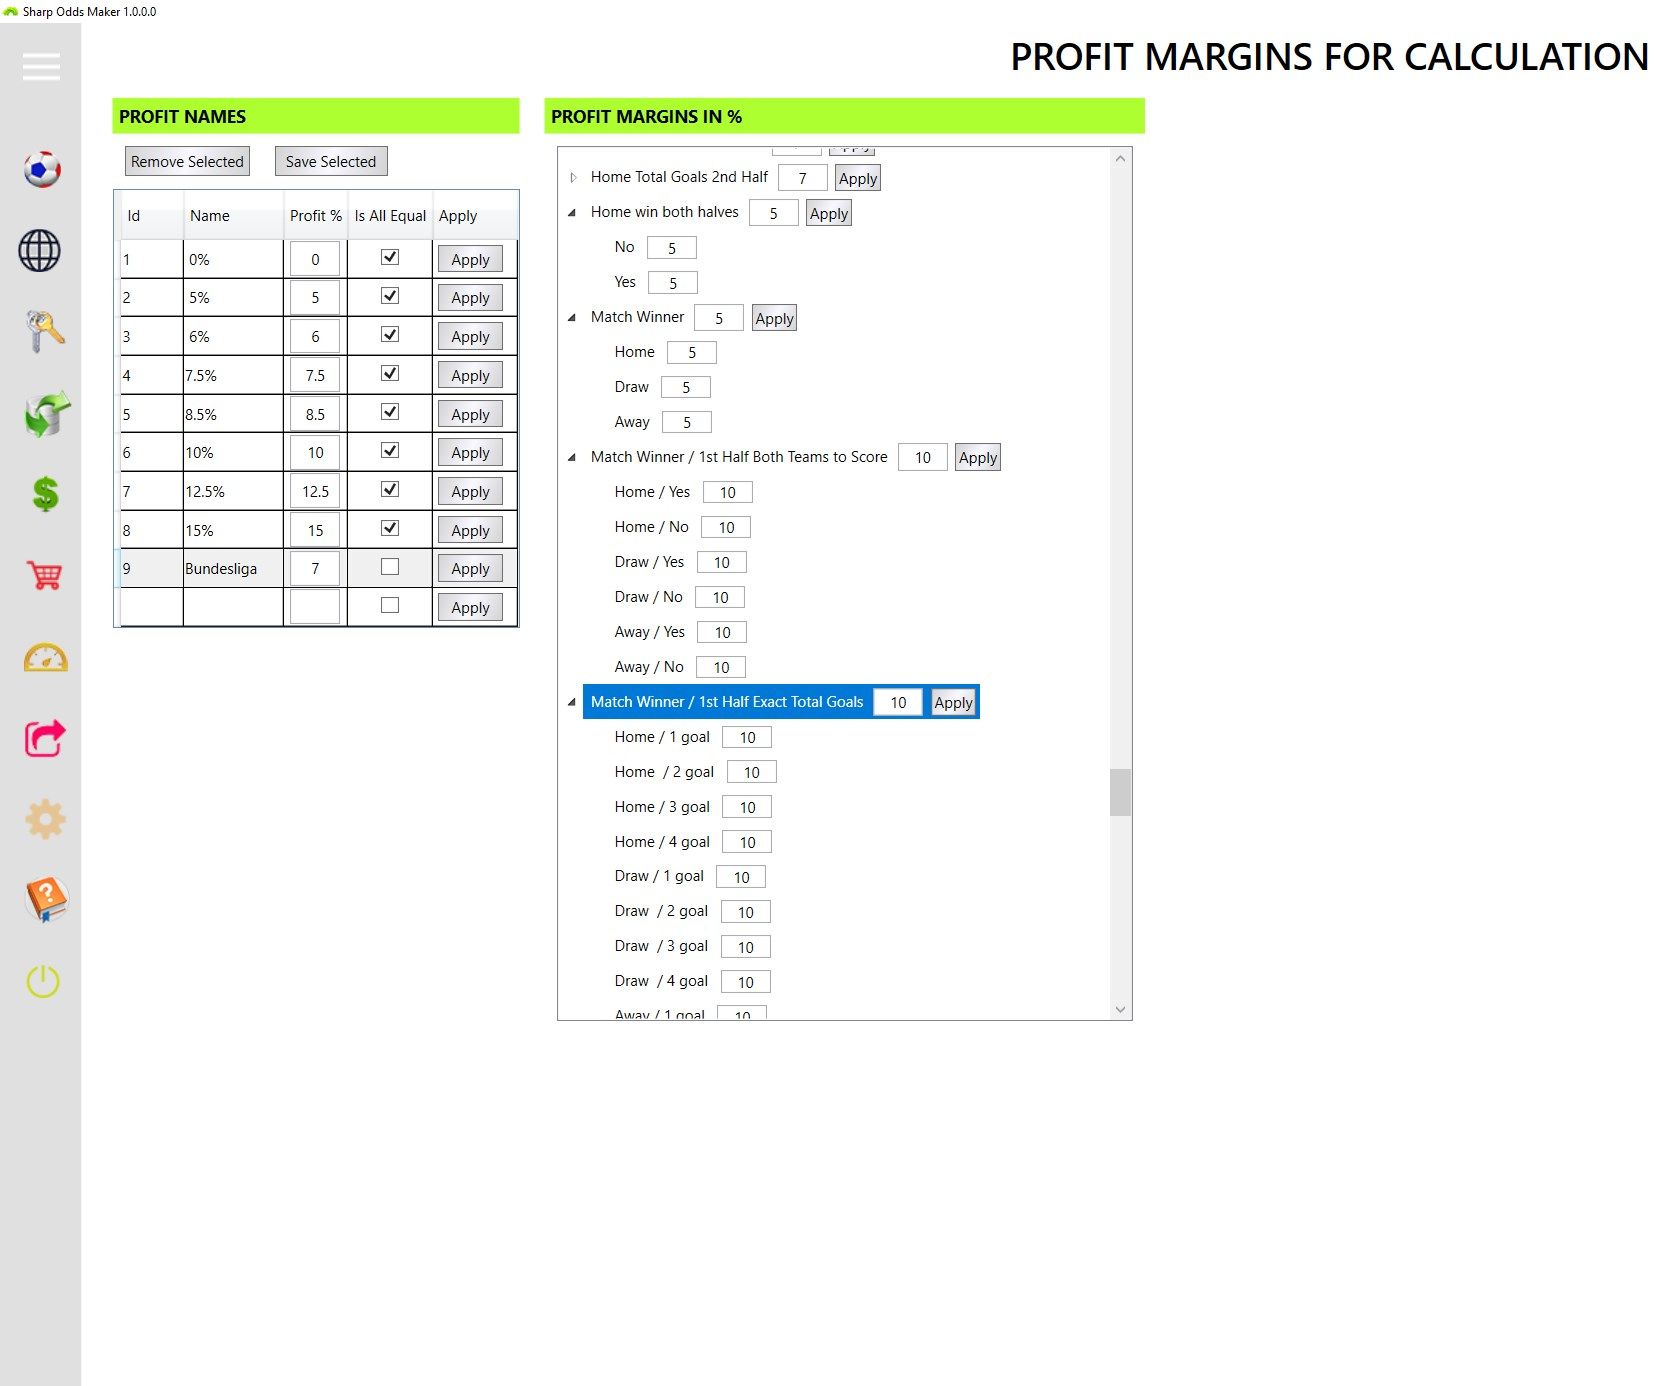 Profit Margins for Calculated Odds